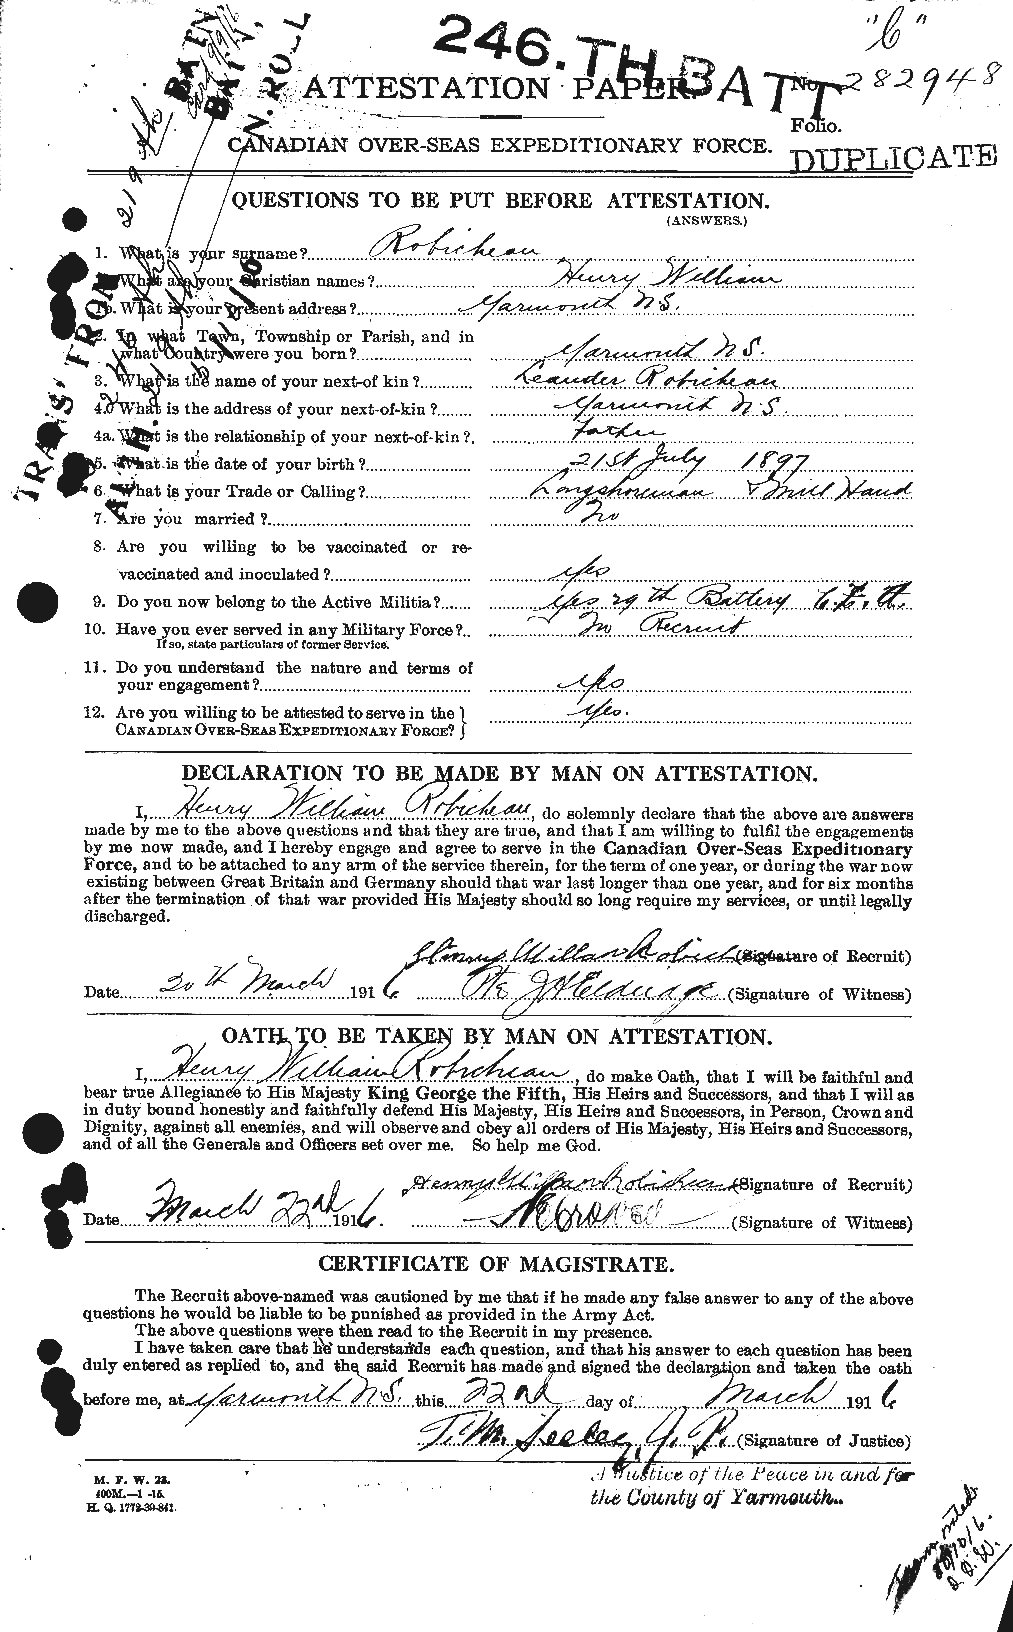 Personnel Records of the First World War - CEF 614836a